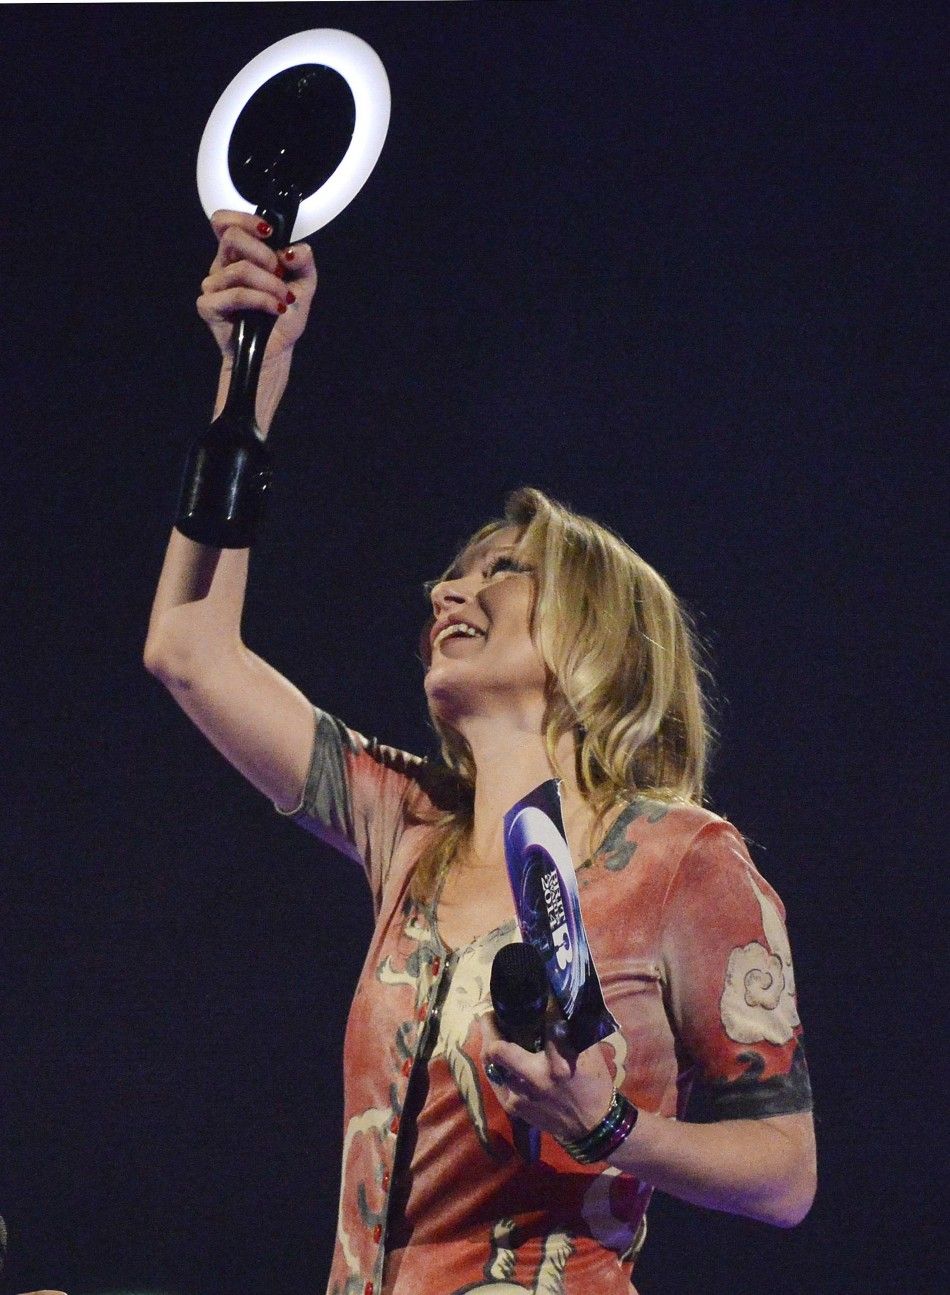 Model Kate Moss accepts the British Male Solo Artist award on behalf of David Bowie at the BRIT Awards in London